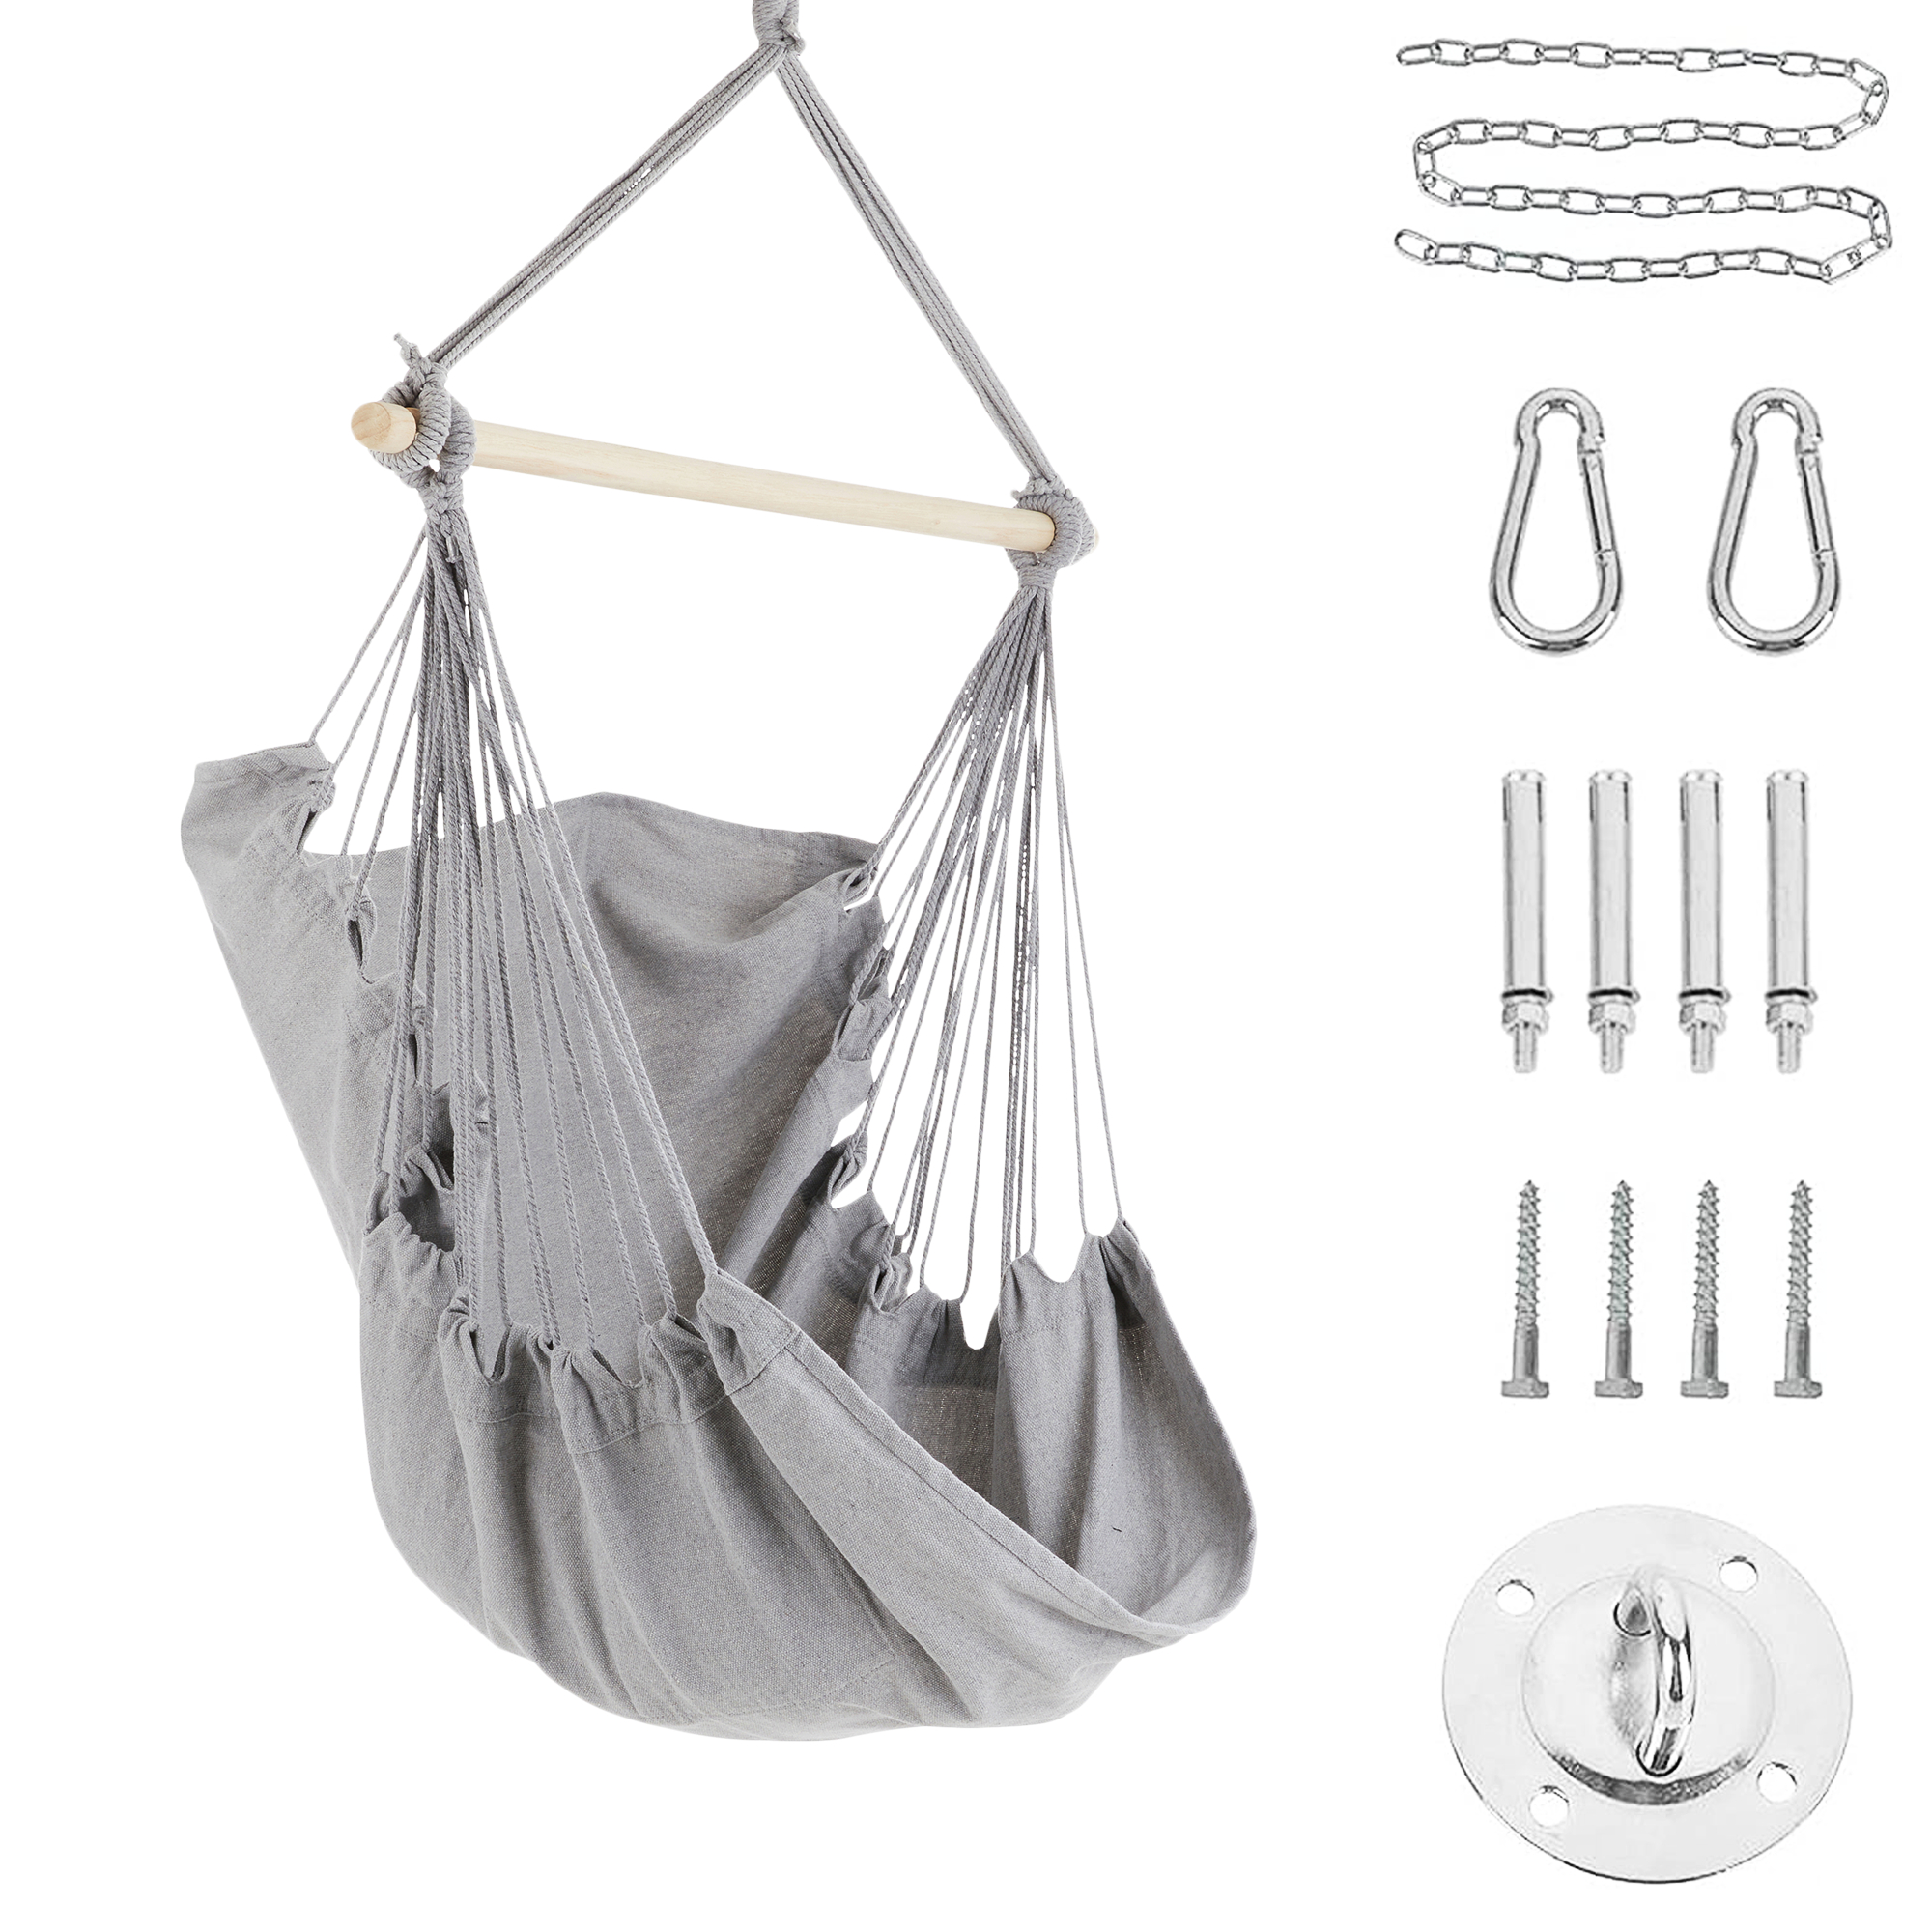 Project One Hanging Rope Hammock Chair, Hanging Rope Swing Seat with Carrying Bag, and Hardware Kit Perfect for Outdoor/Indoor Yard Deck Pat - Light